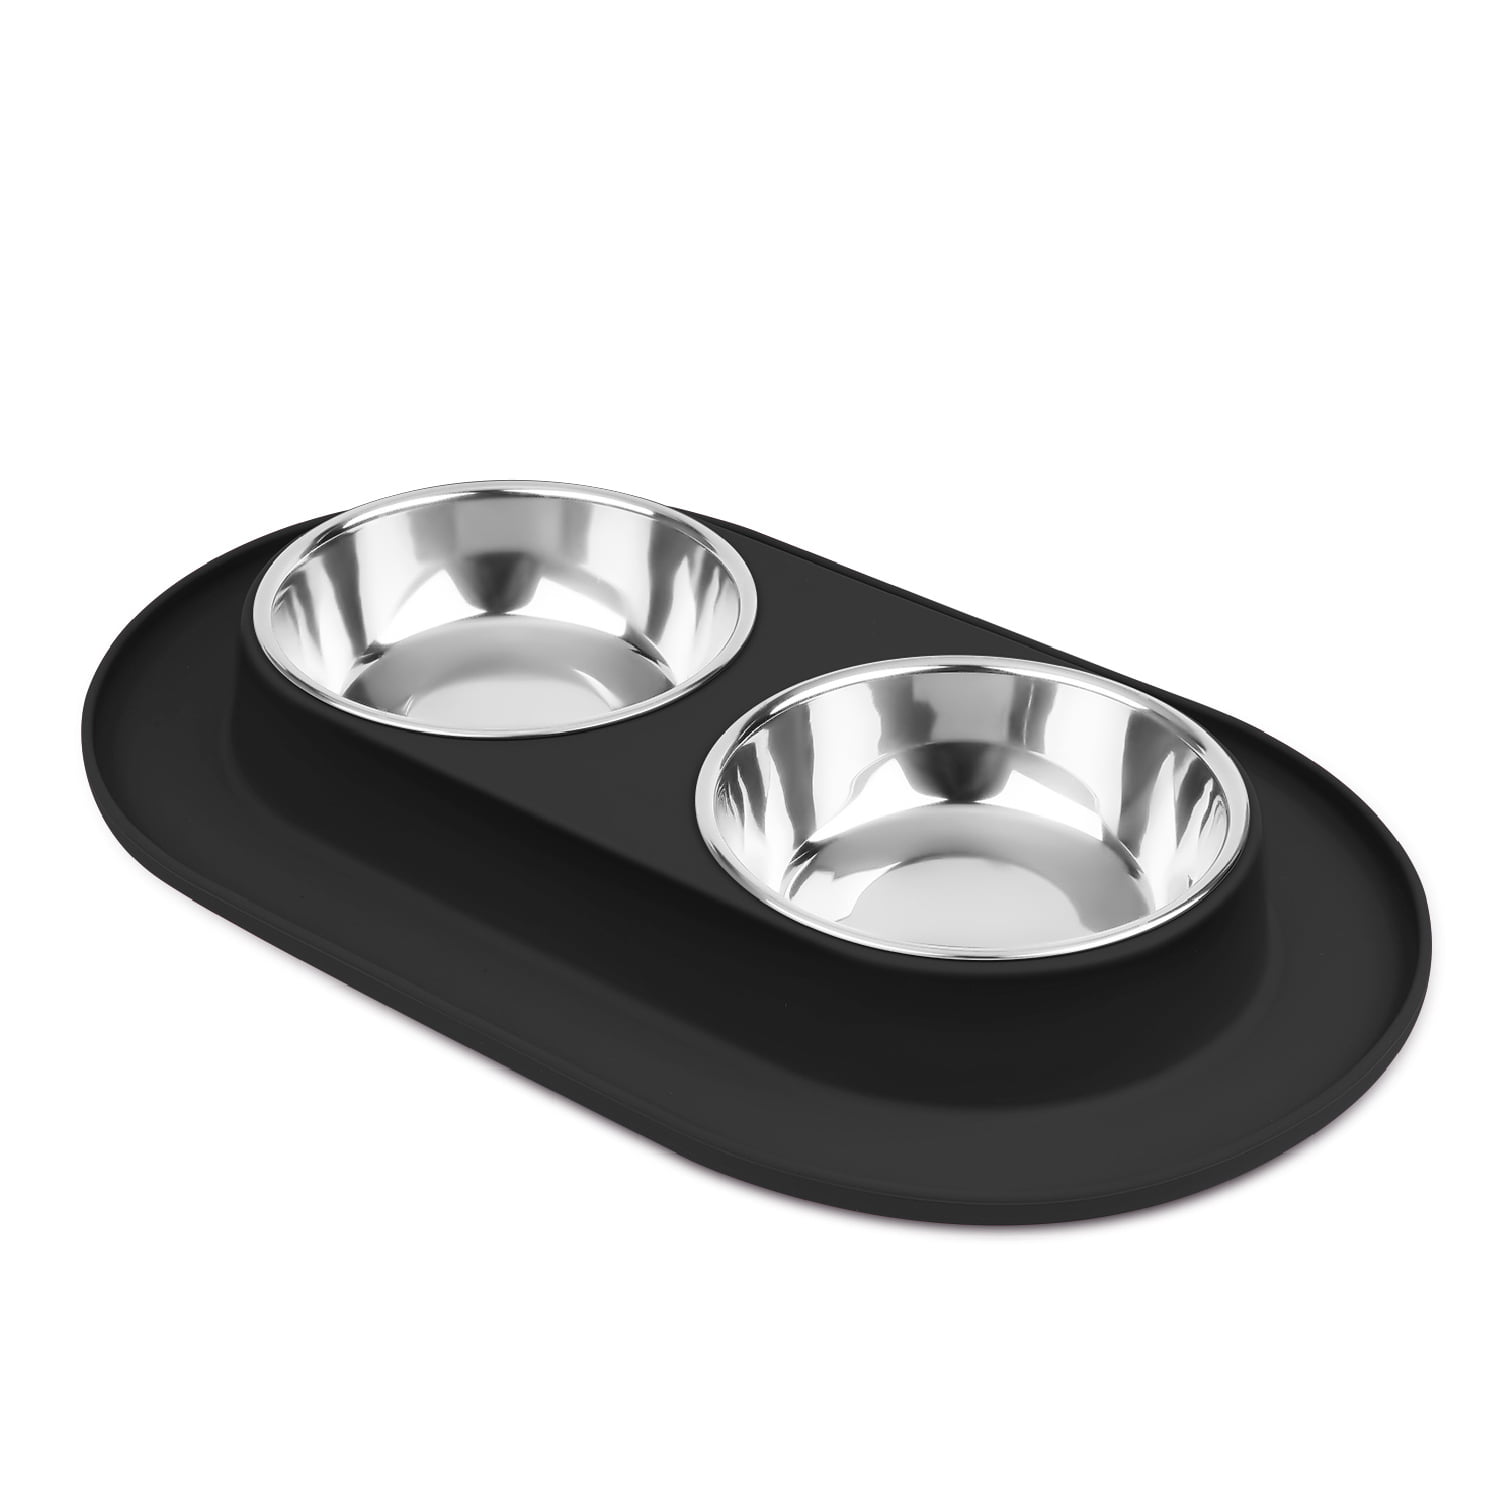 Bent & Freck bent & freck dog feeding station - spill proof small dog bowls  for food and water - puppy sized dishes for boy or girl dogs